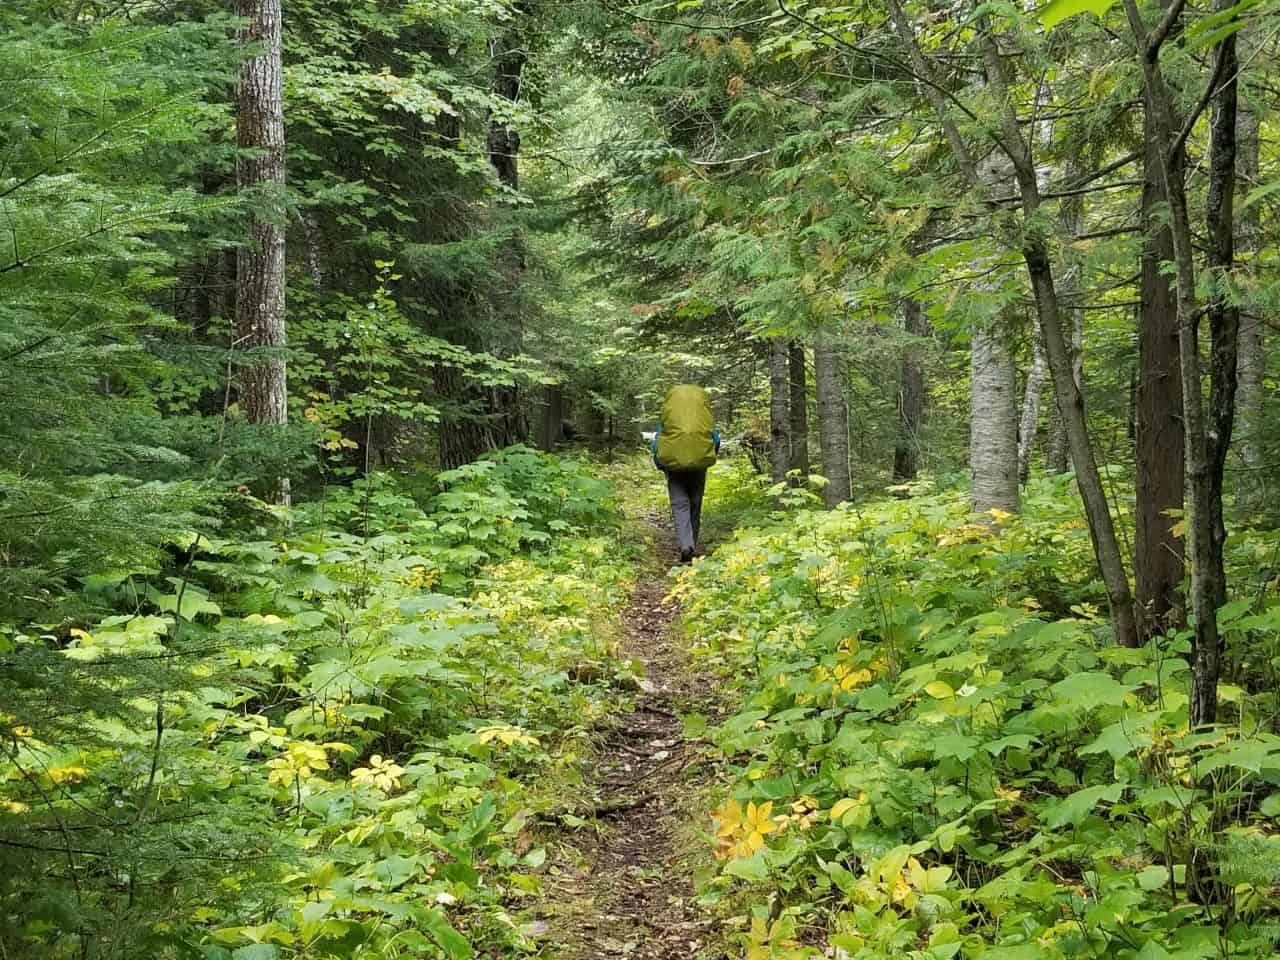 Kabeyun Trail is one of the best sections of the Trans Canada Trail in Ontario, Canada for backcountry hiking and wilderness camping